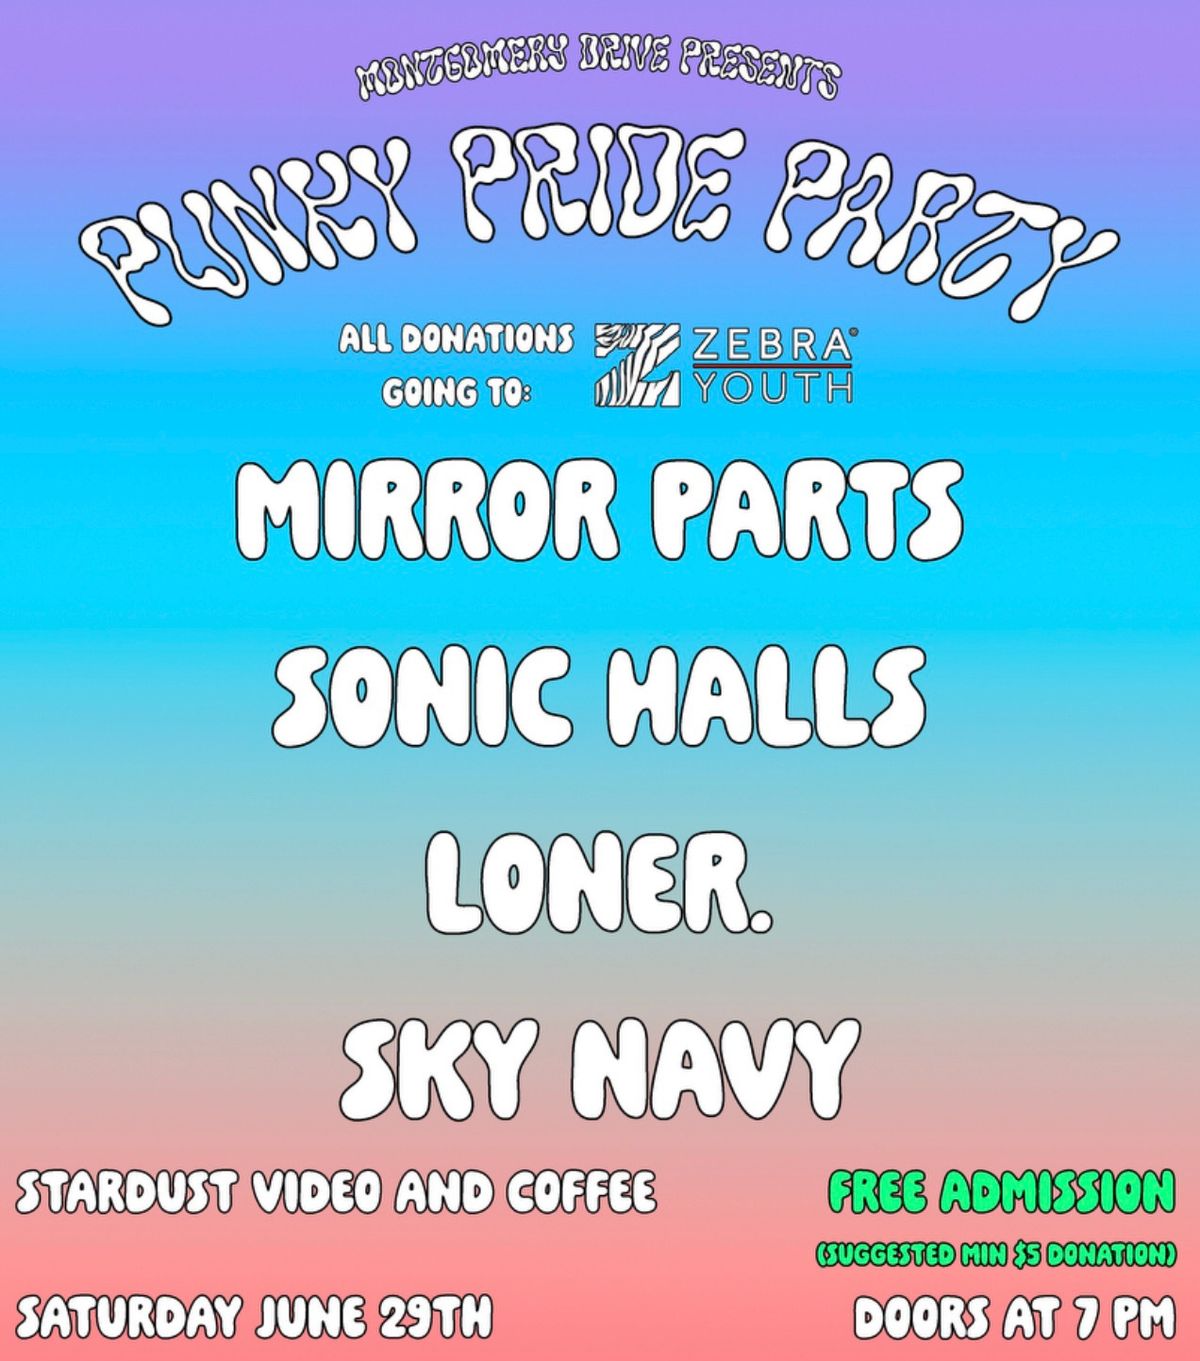 Punky Pride Part with Mirror Parts, Sonic Halls, Loner., and Sky Navy. All donations to Zebra Youth.